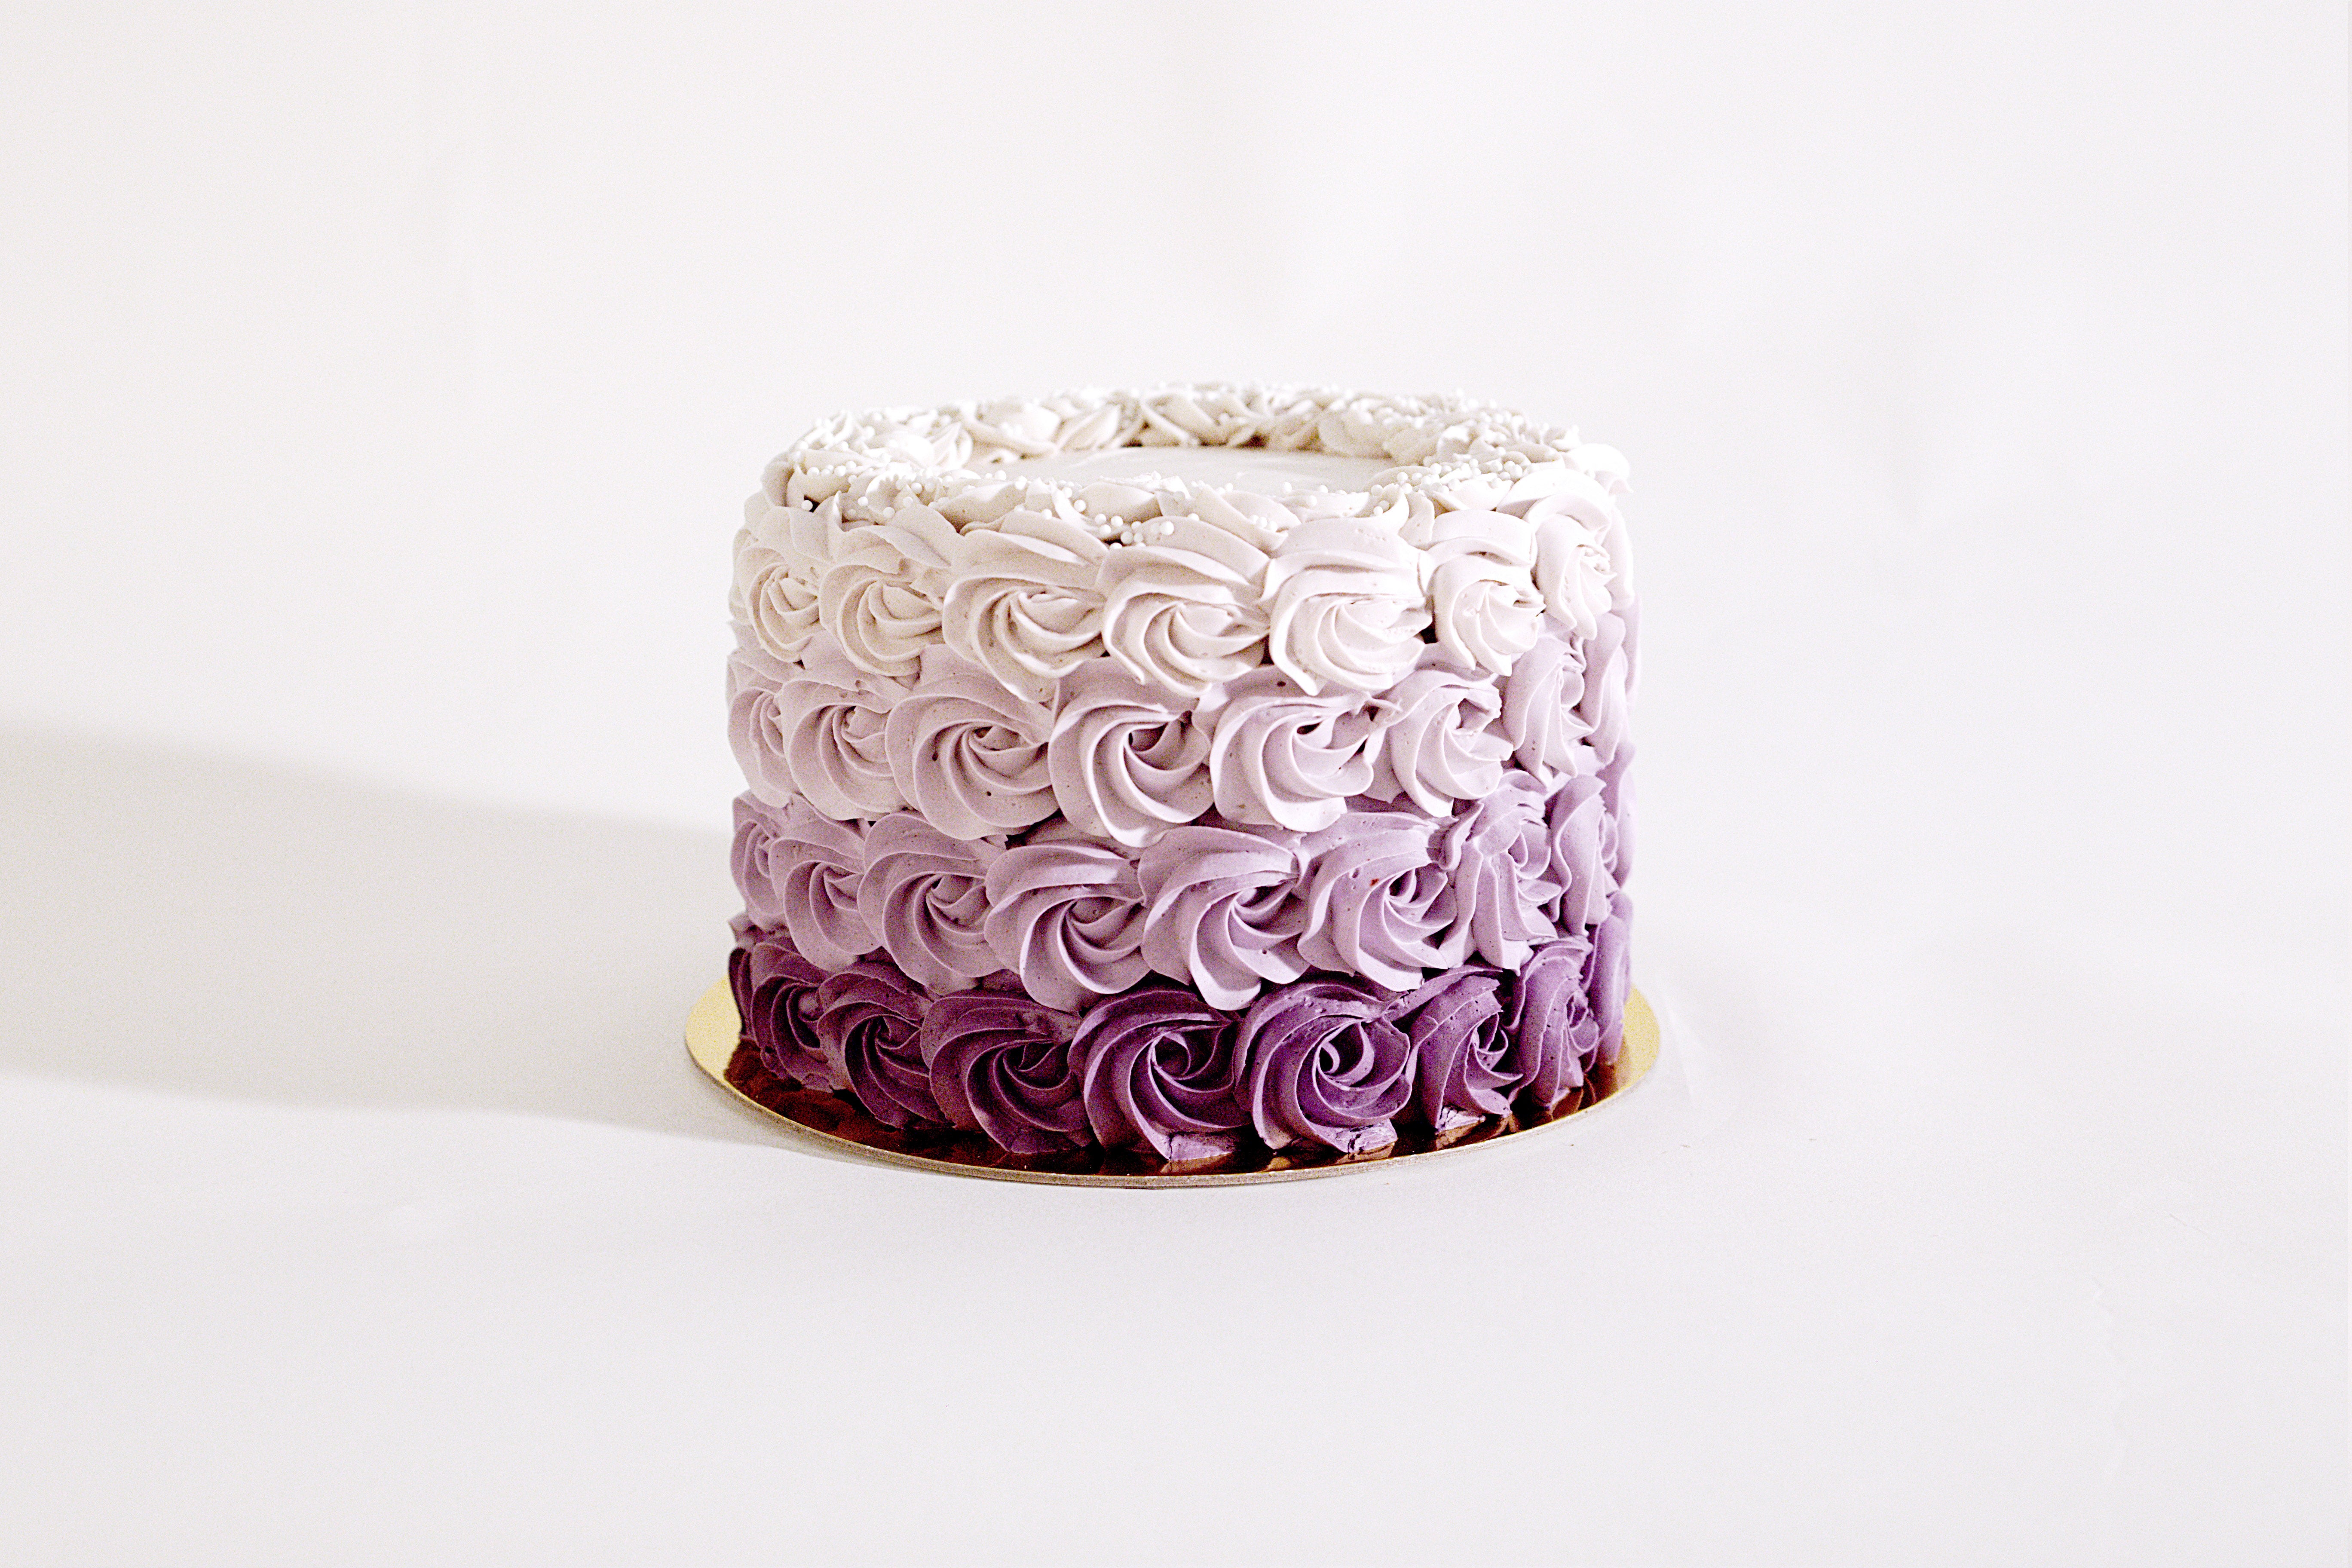 Rosette Ombre Layer Cake - Classy Girl Cupcakes